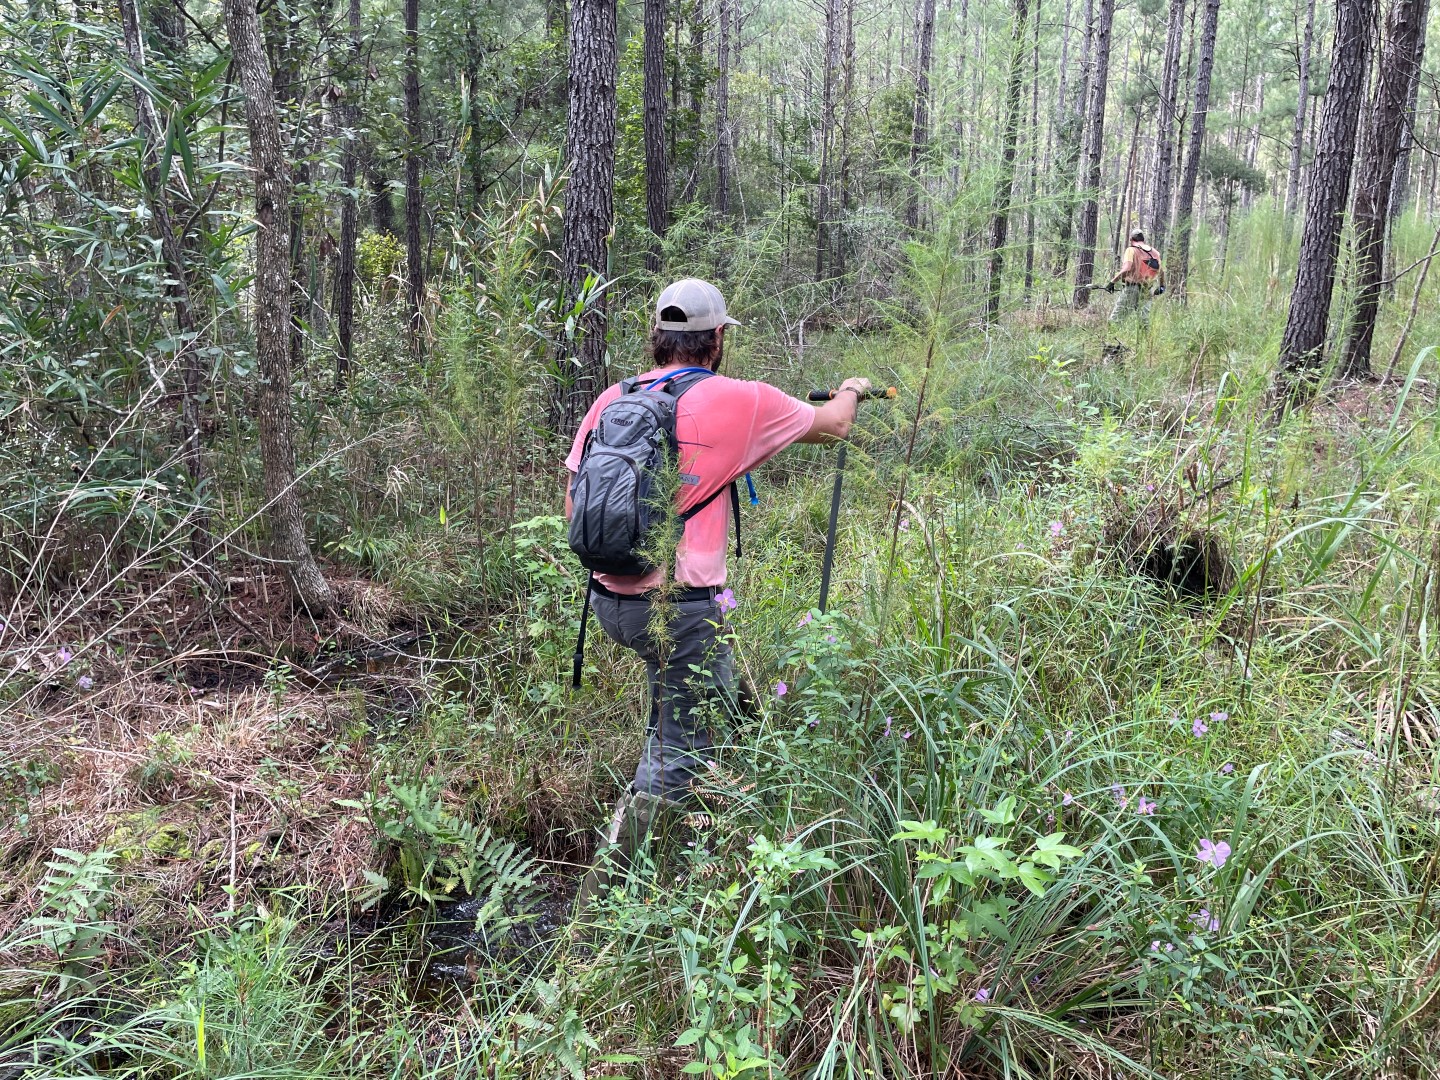 Photo: Two men in safety-orange shirts and grey baseball caps walking through deep grasses in the woods away from the camera. The man in the foreground is wearing a grey backpack and holding a surveying tool.